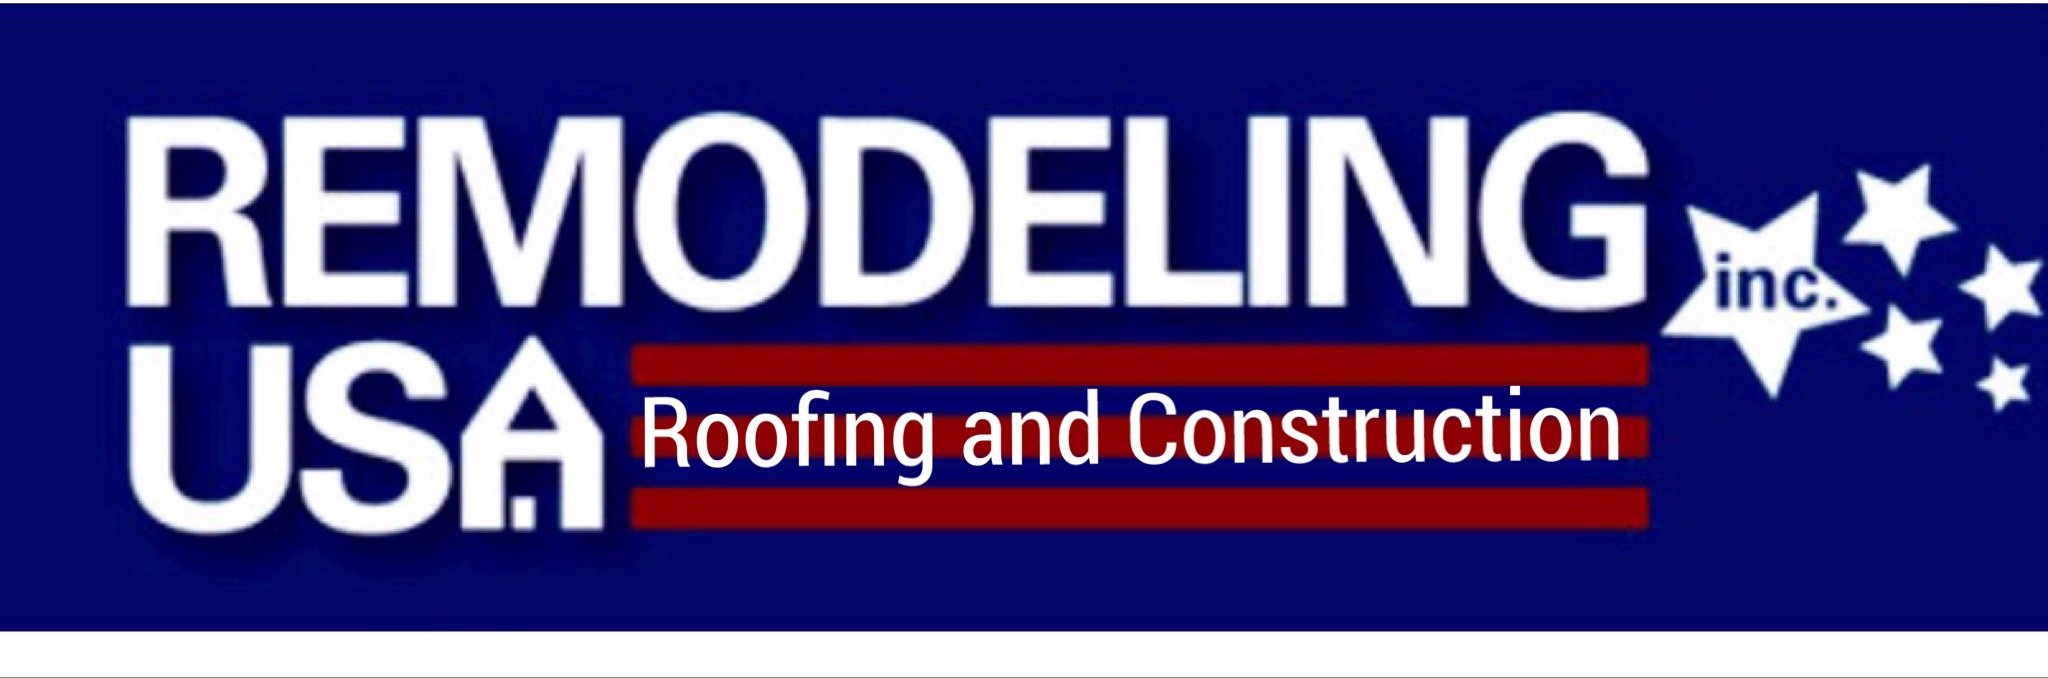 Remodeling USA Roofing and Construction, Inc. Logo